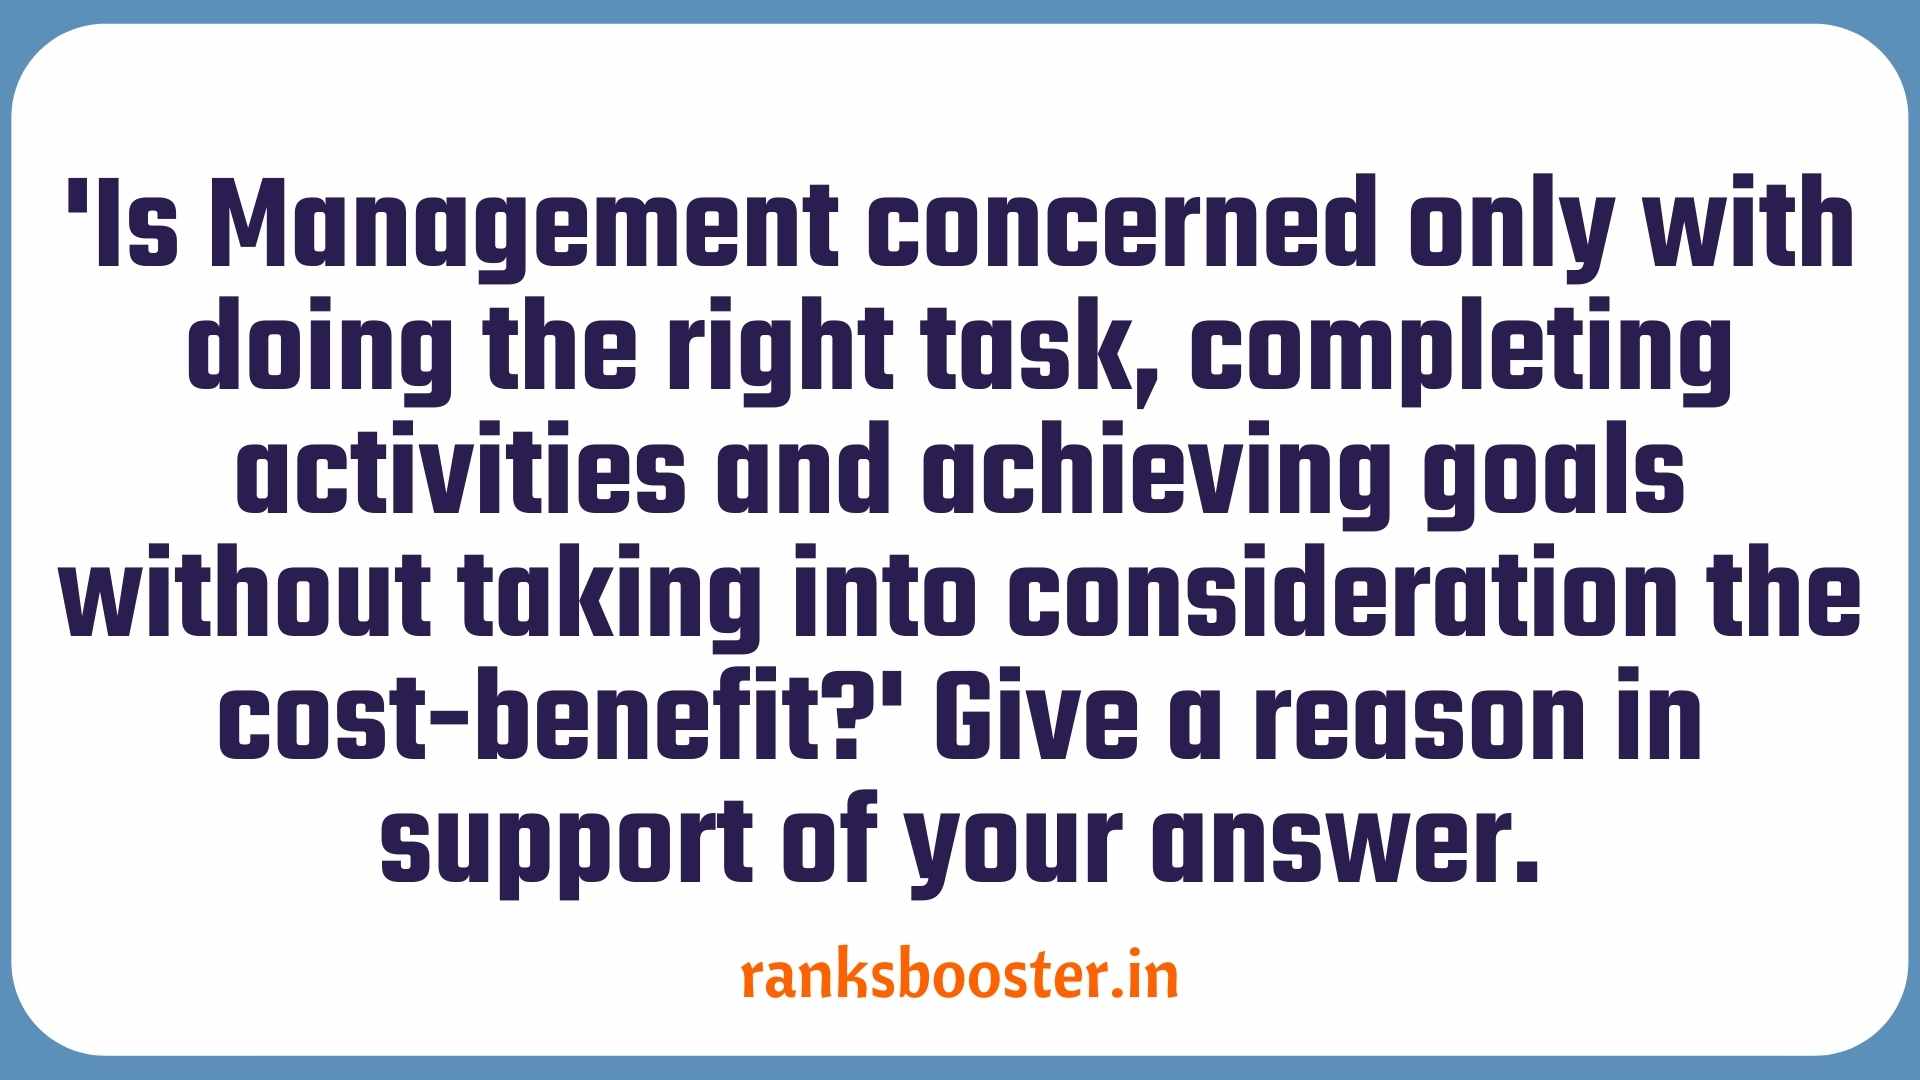 'Is Management concerned only with doing the right task, completing activities and achieving goals without taking into consideration the cost-benefit?' Give a reason in support of your answer. (CBSE Board 2016)